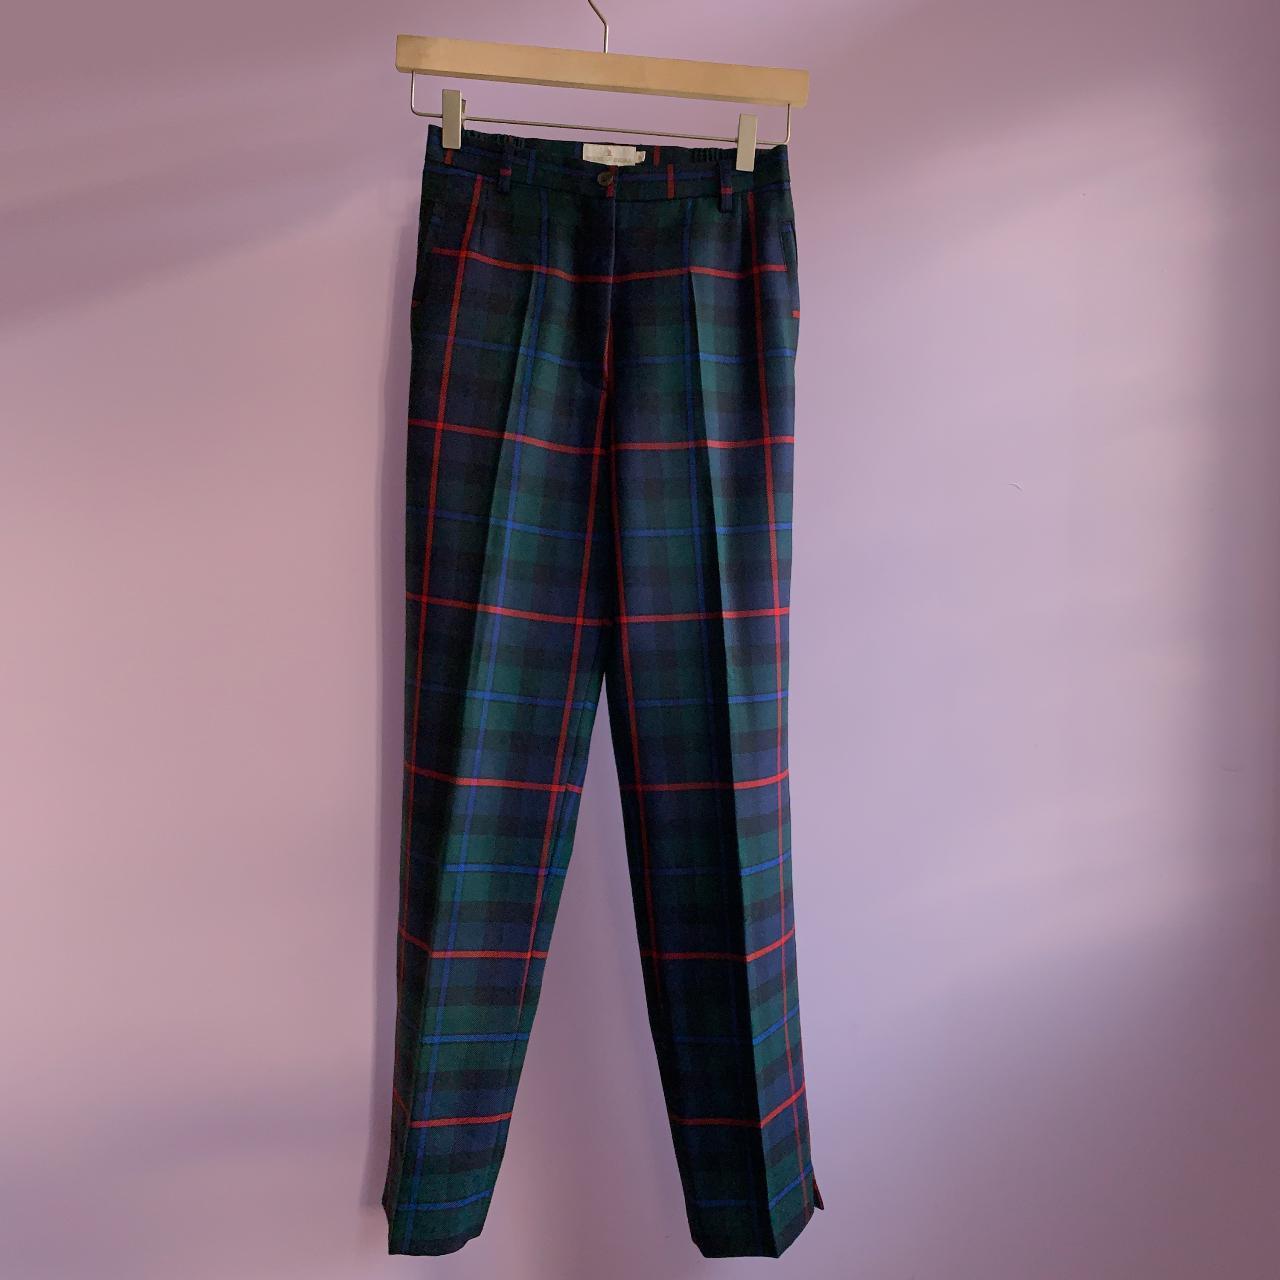 Product Image 1 - HOUSE OF BRUAR TARTAN TROUSERS
